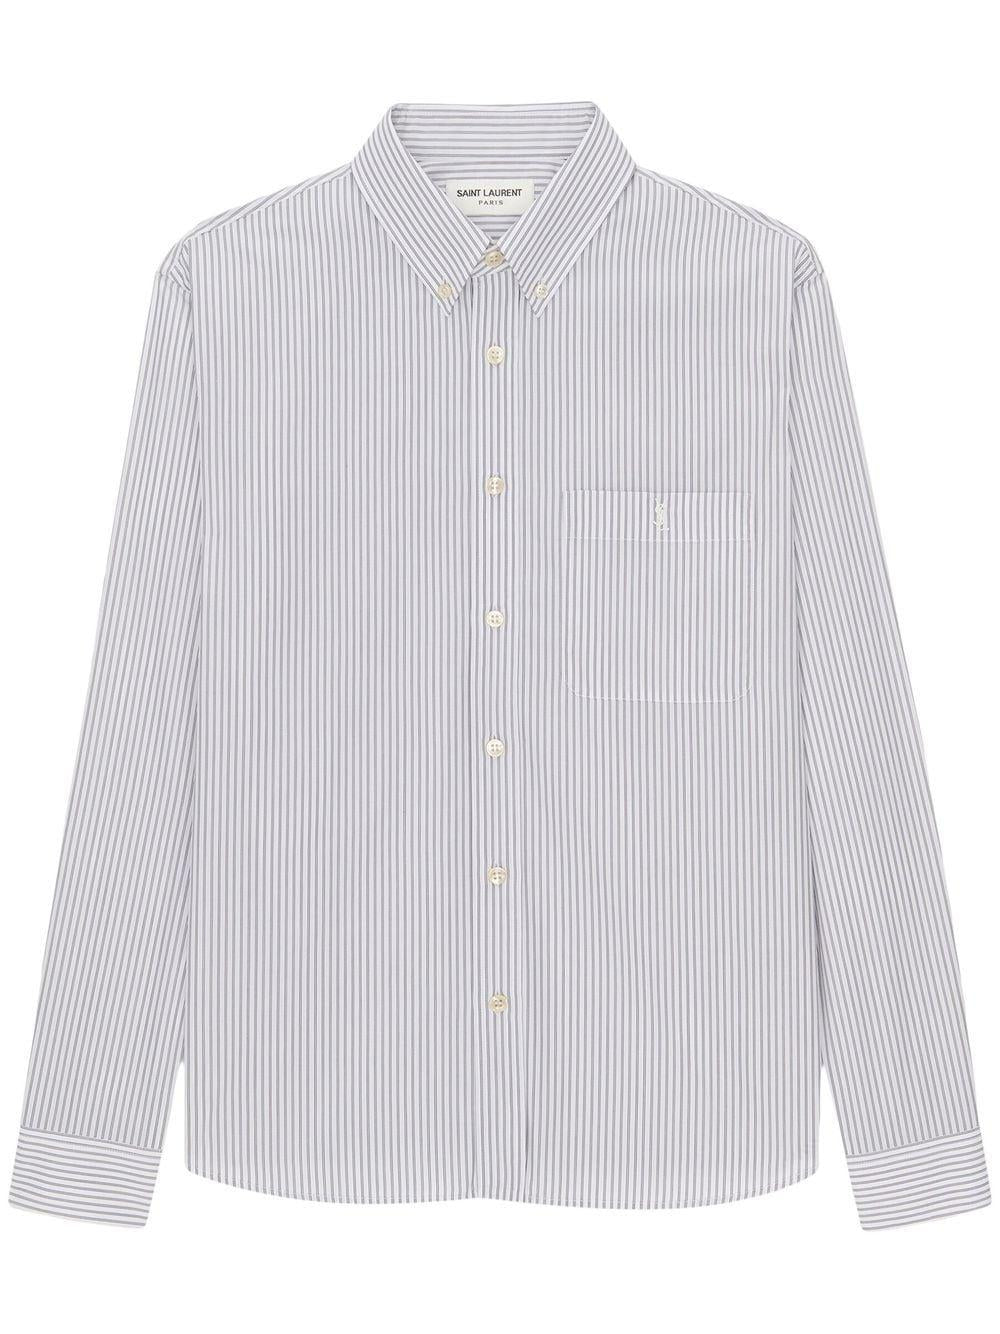 Mens Cotton Striped Shirt - FW24 Collection